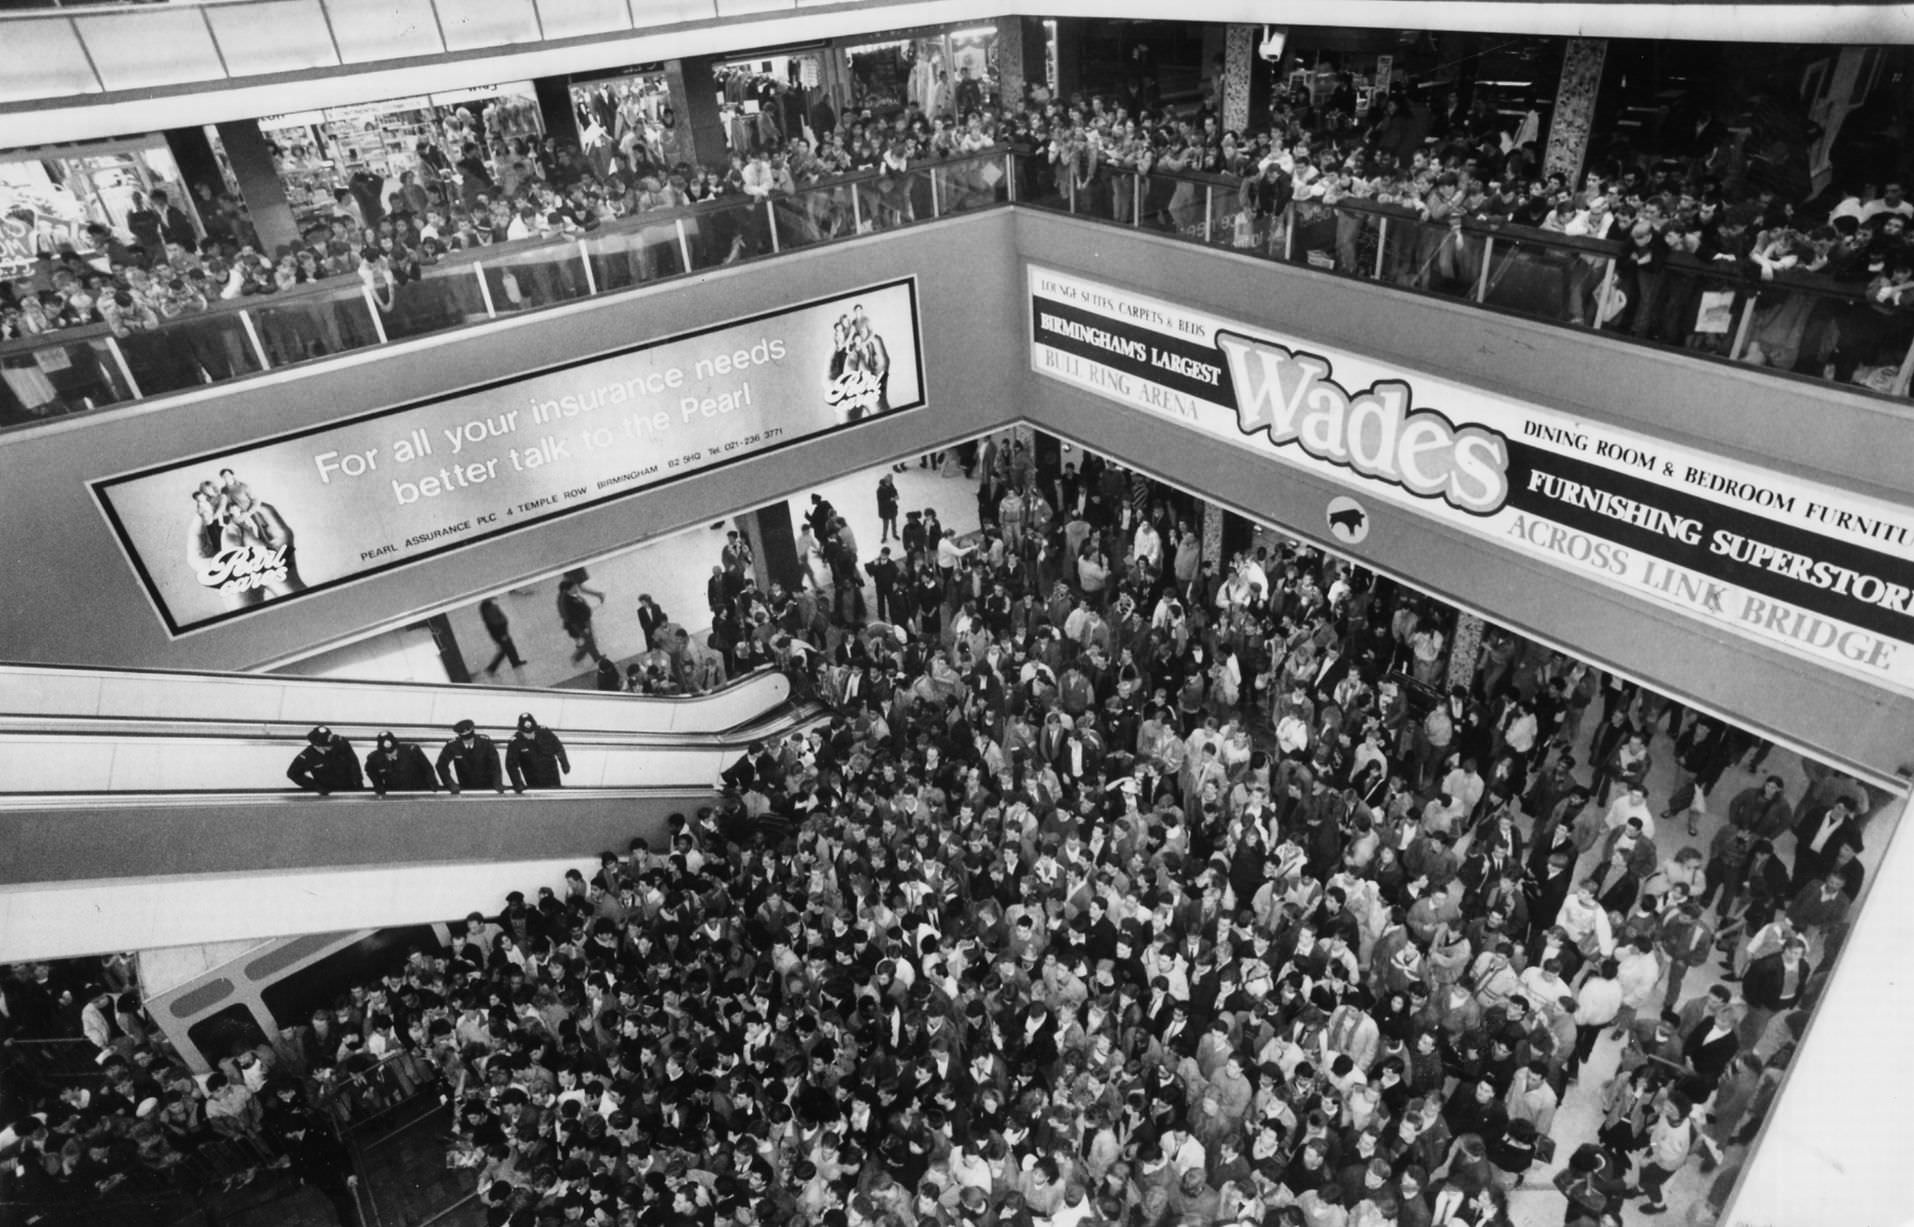 Thousands of young pop fans gather at the Bull Ring Shopping Centre for pop singer Tiffany, 19th January 1988.